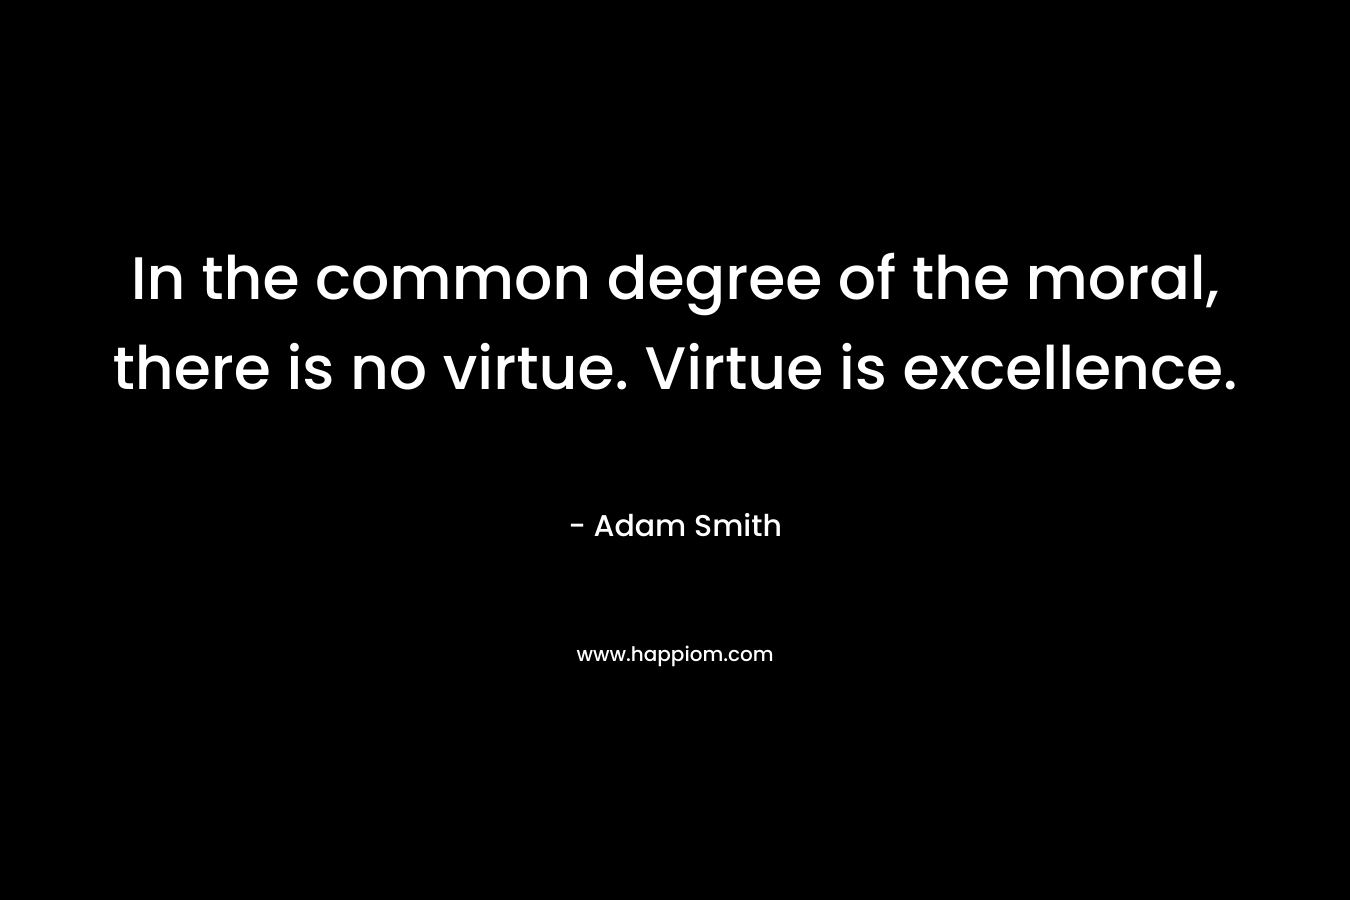 In the common degree of the moral, there is no virtue. Virtue is excellence. – Adam Smith